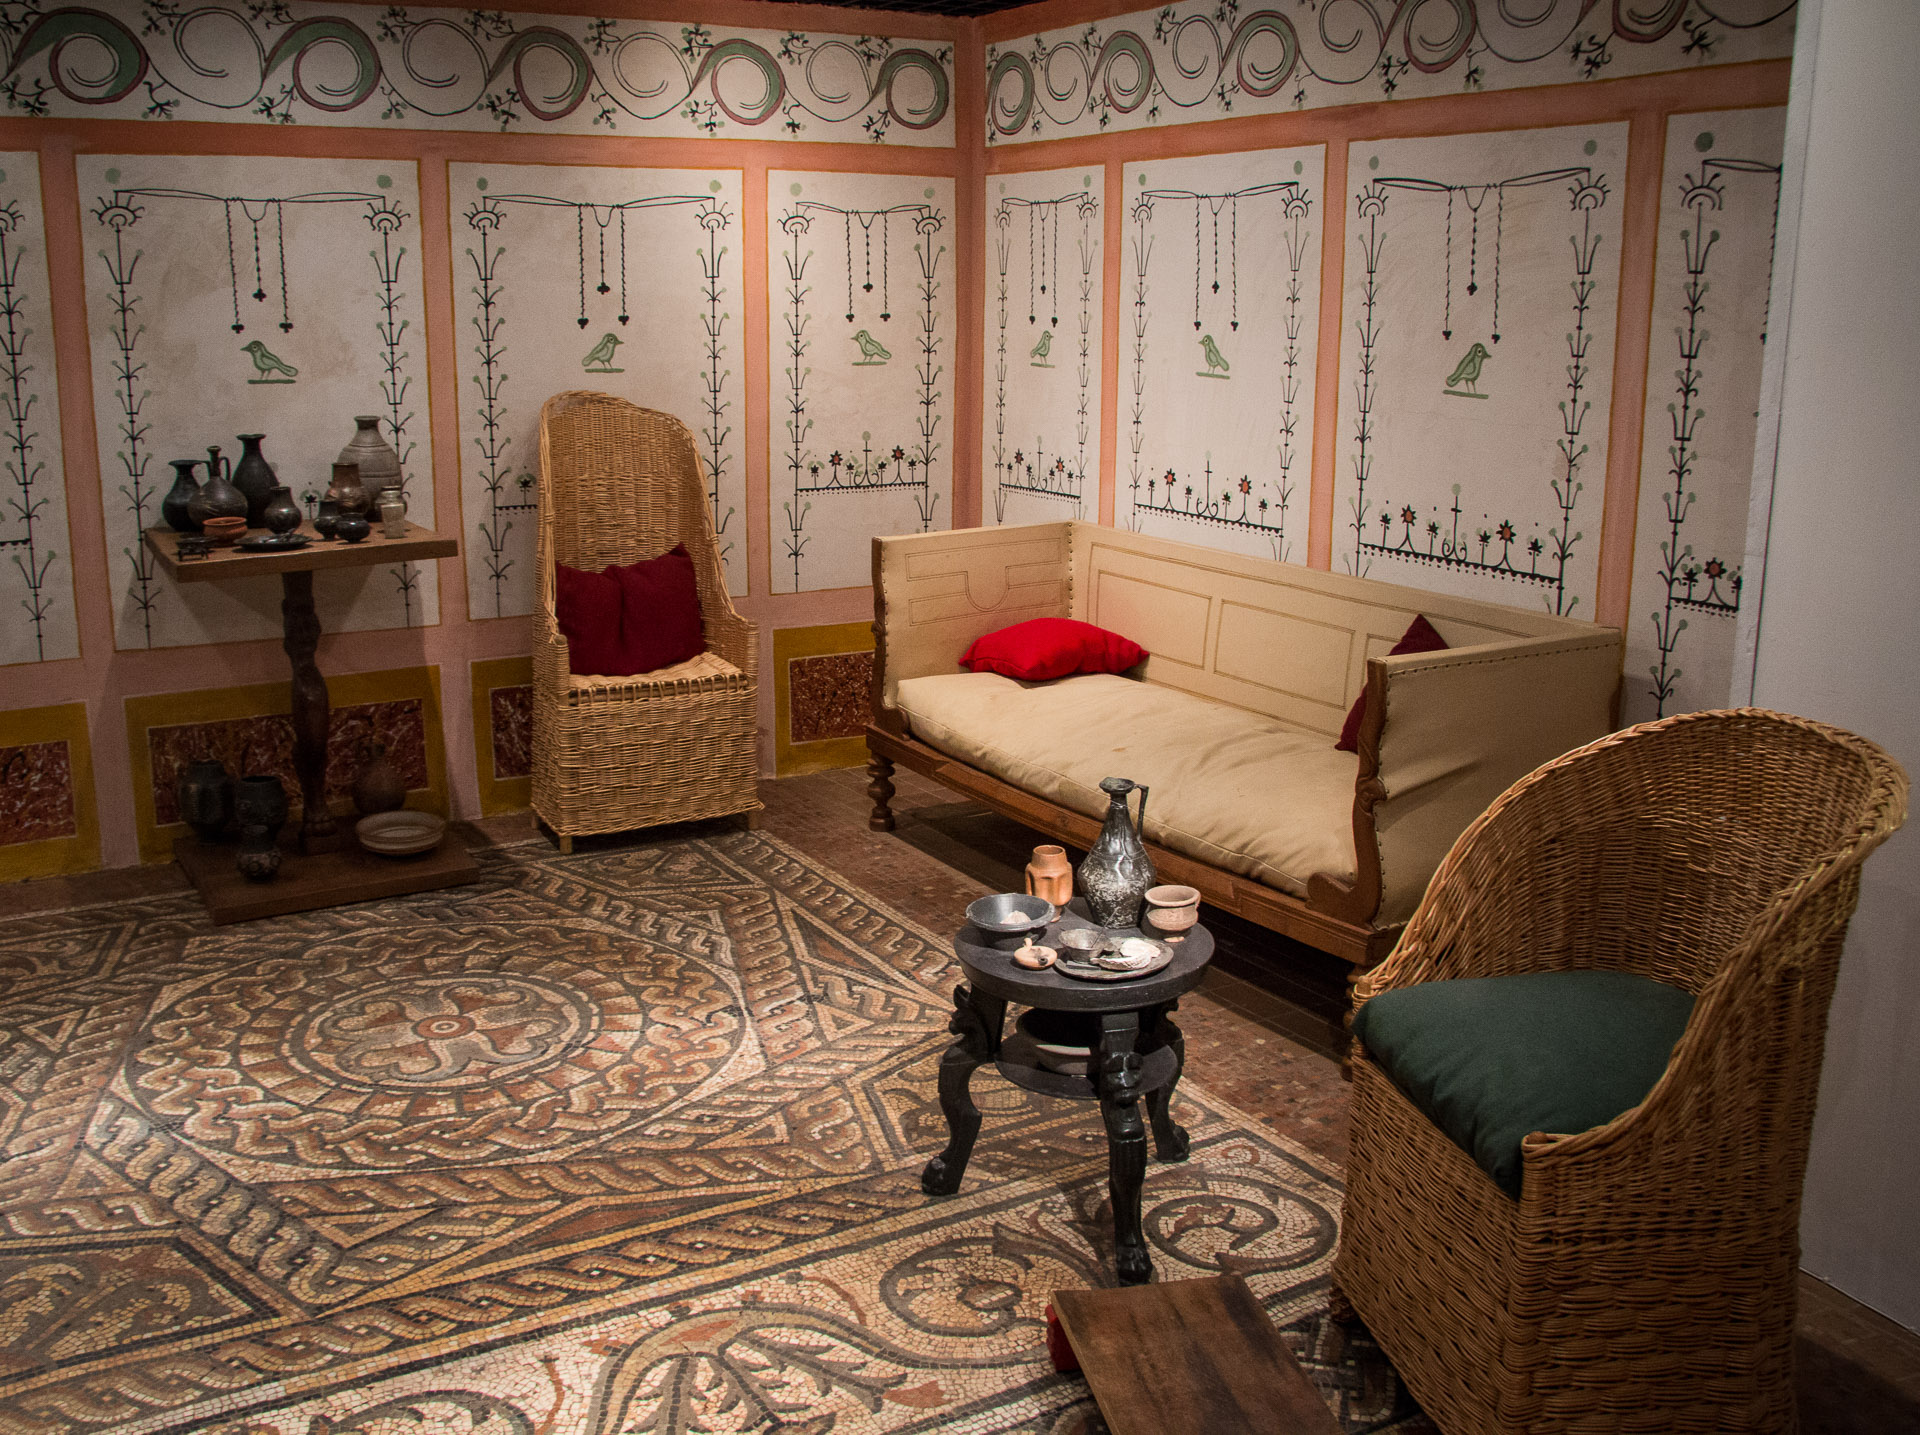 Reconstructed triclinicum (dining room) from AD 300 at the Museum of London